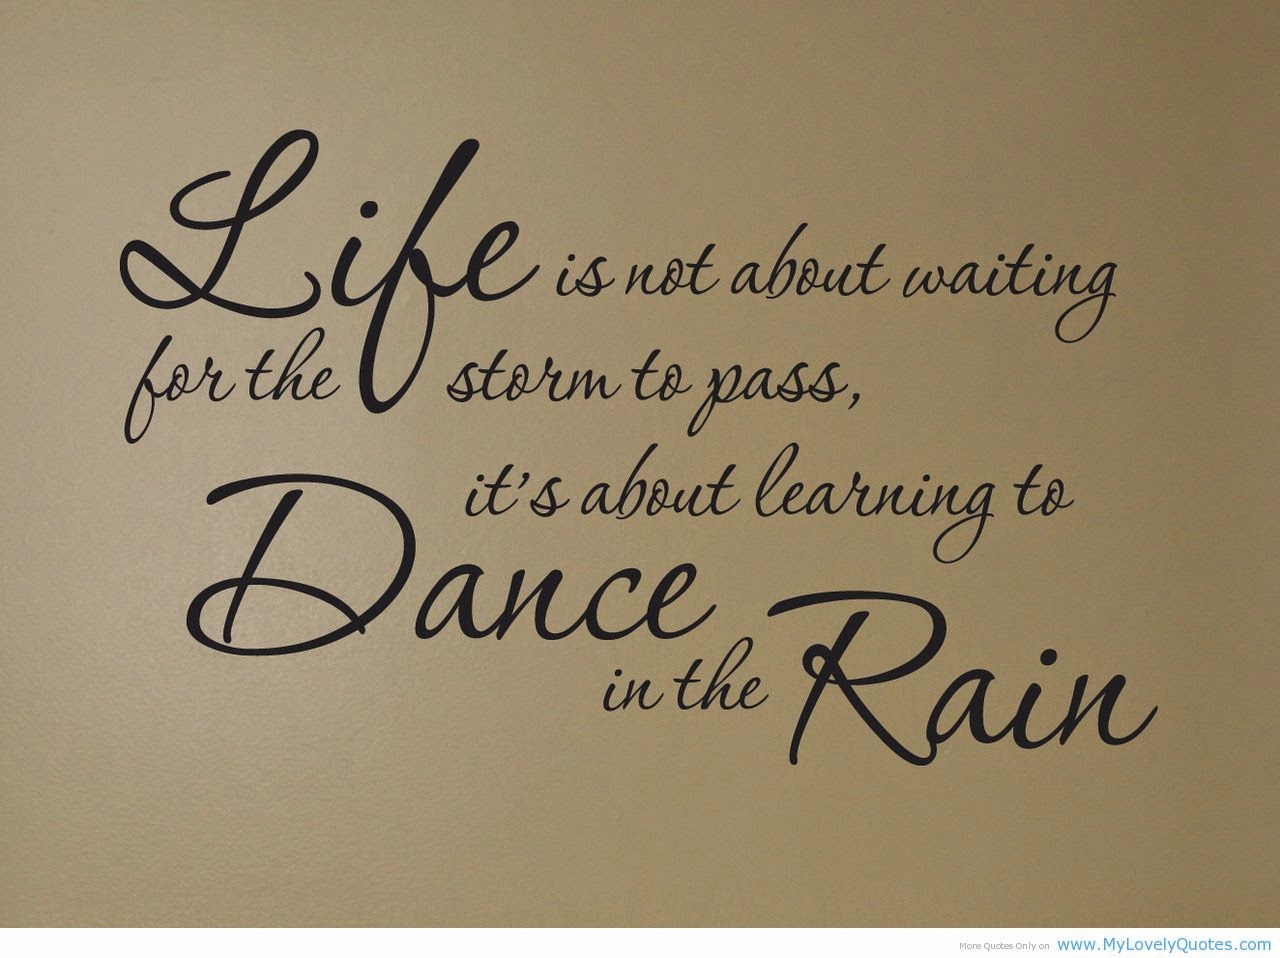 "Life is not about waiting for the storm to pass it s about learning dance in the rain "